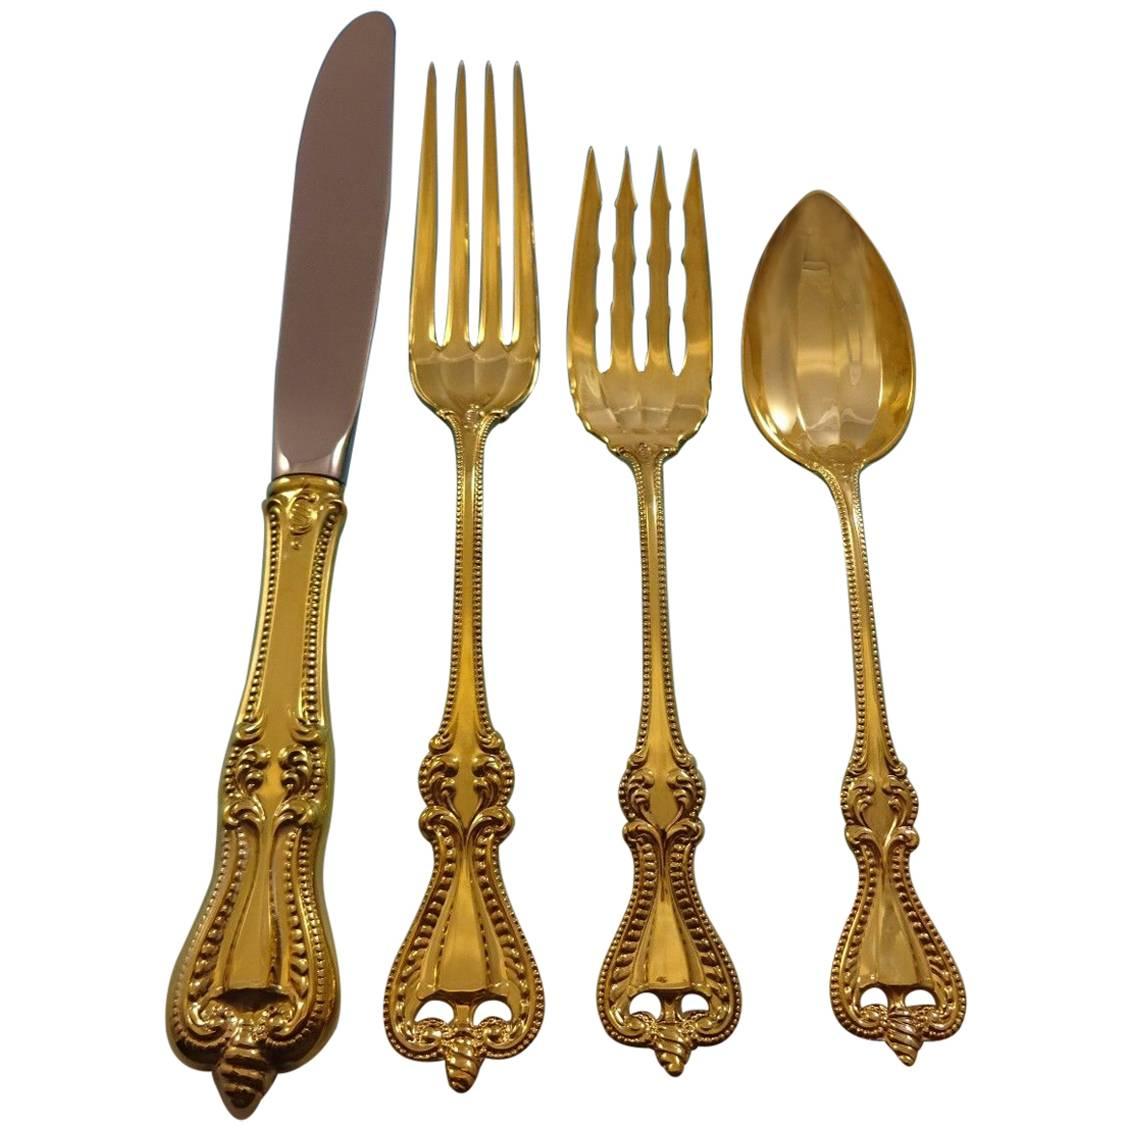 Old Colonial Gold by Towle, Sterlingsilber-Besteck für 8 Personen, Vermeil